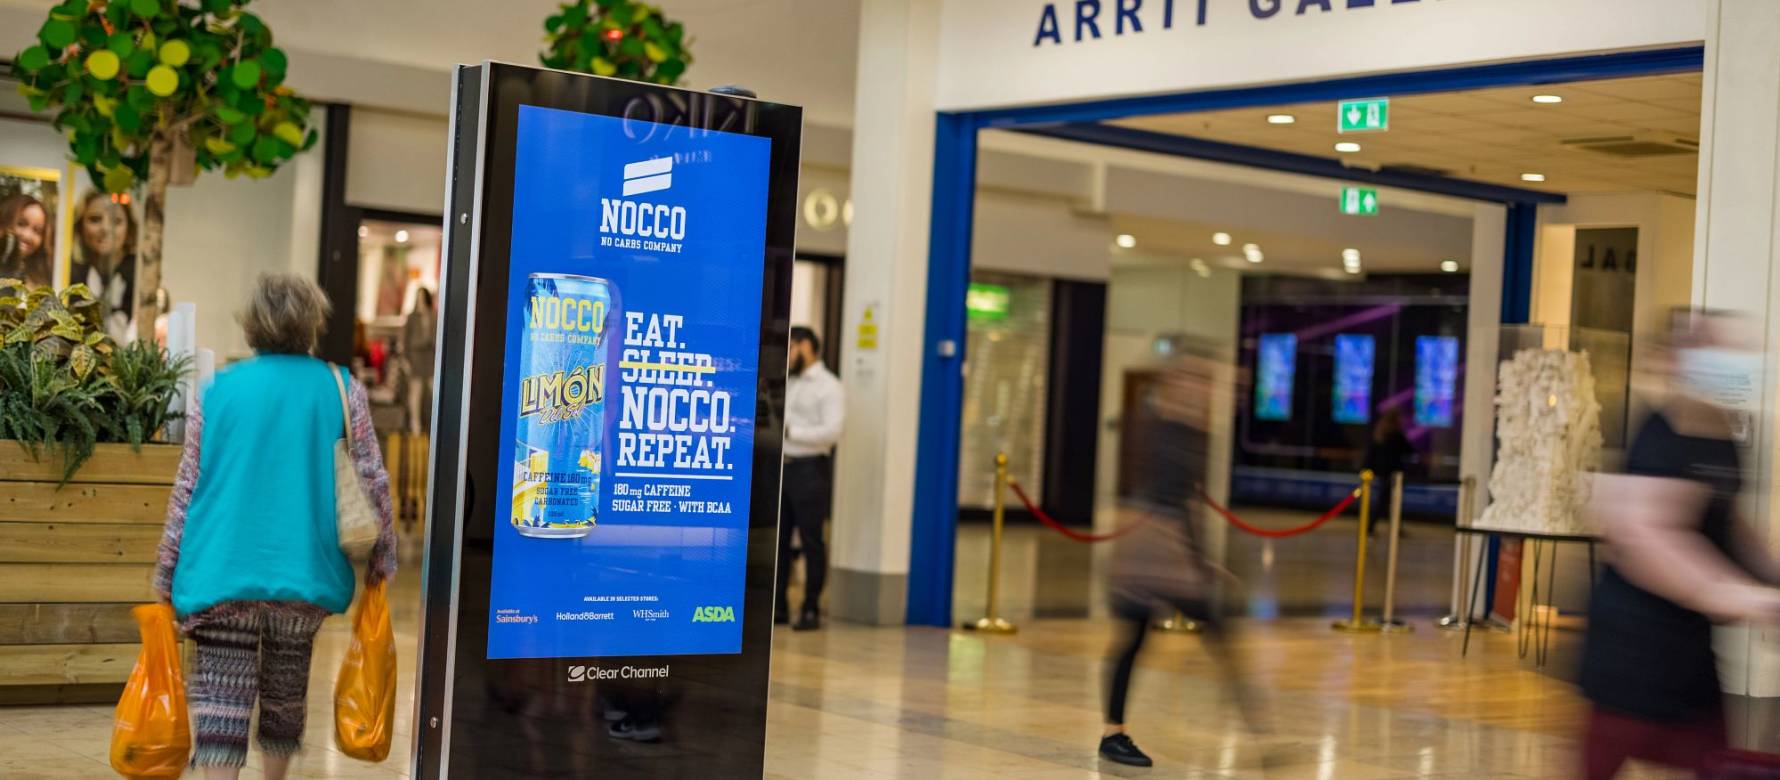 A Nocco drink ad on a digital advertising screen inside a shopping mall with people walking past